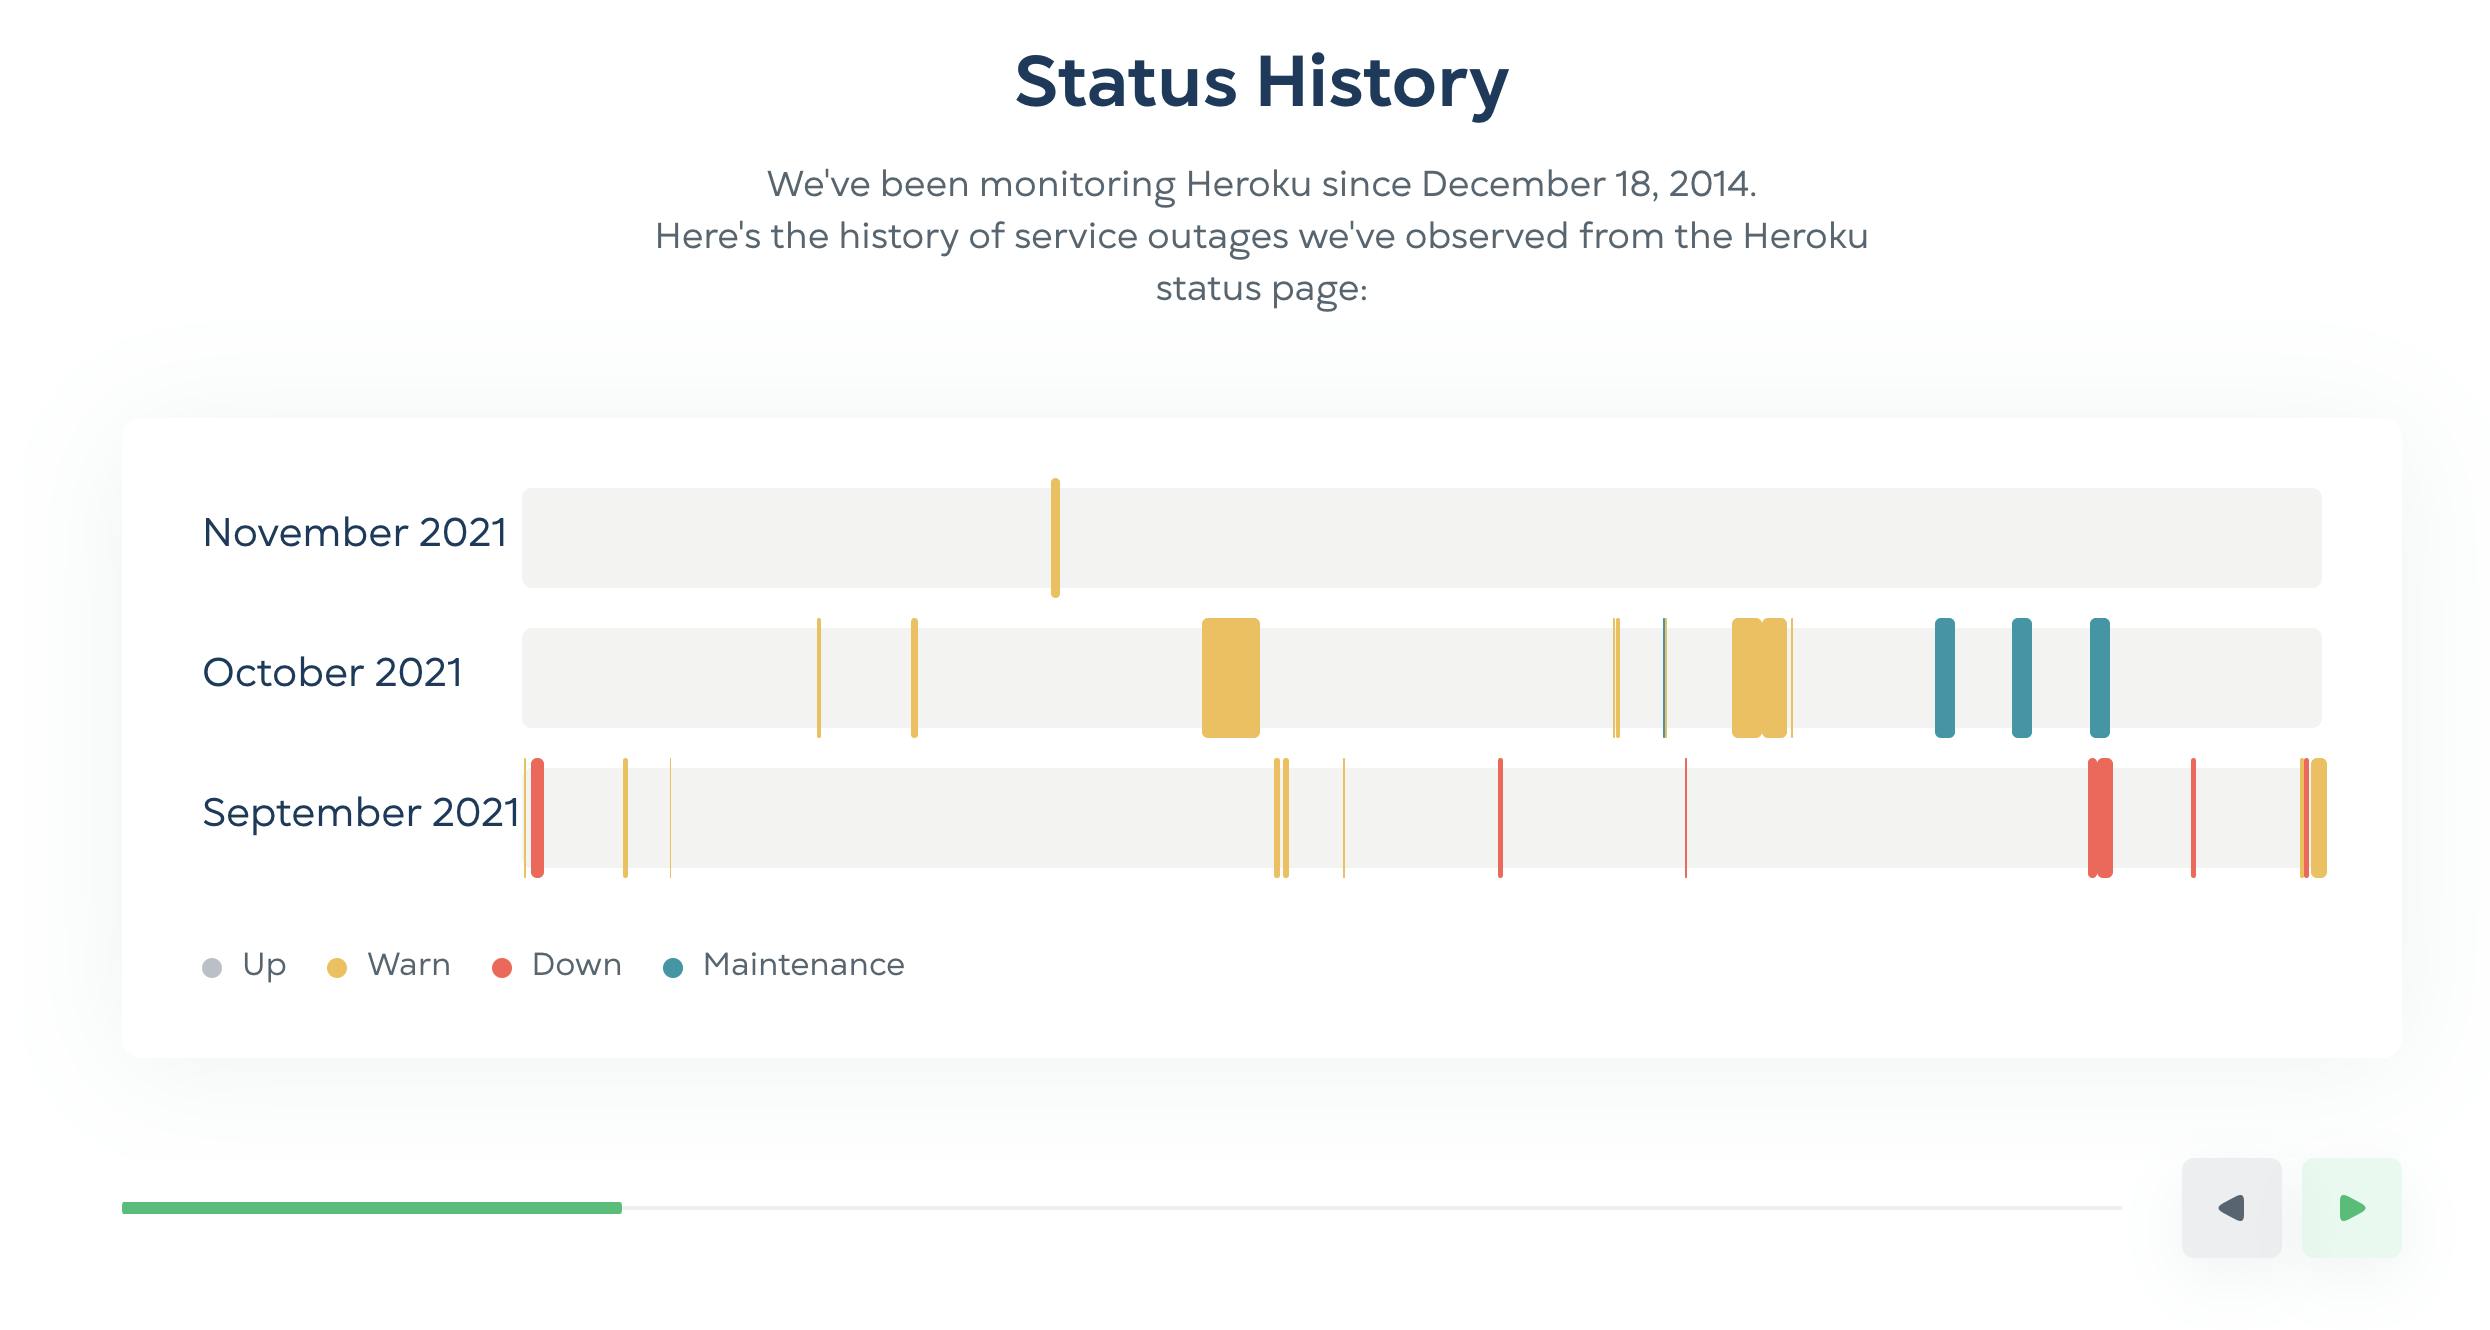 Heroku outages over the last months